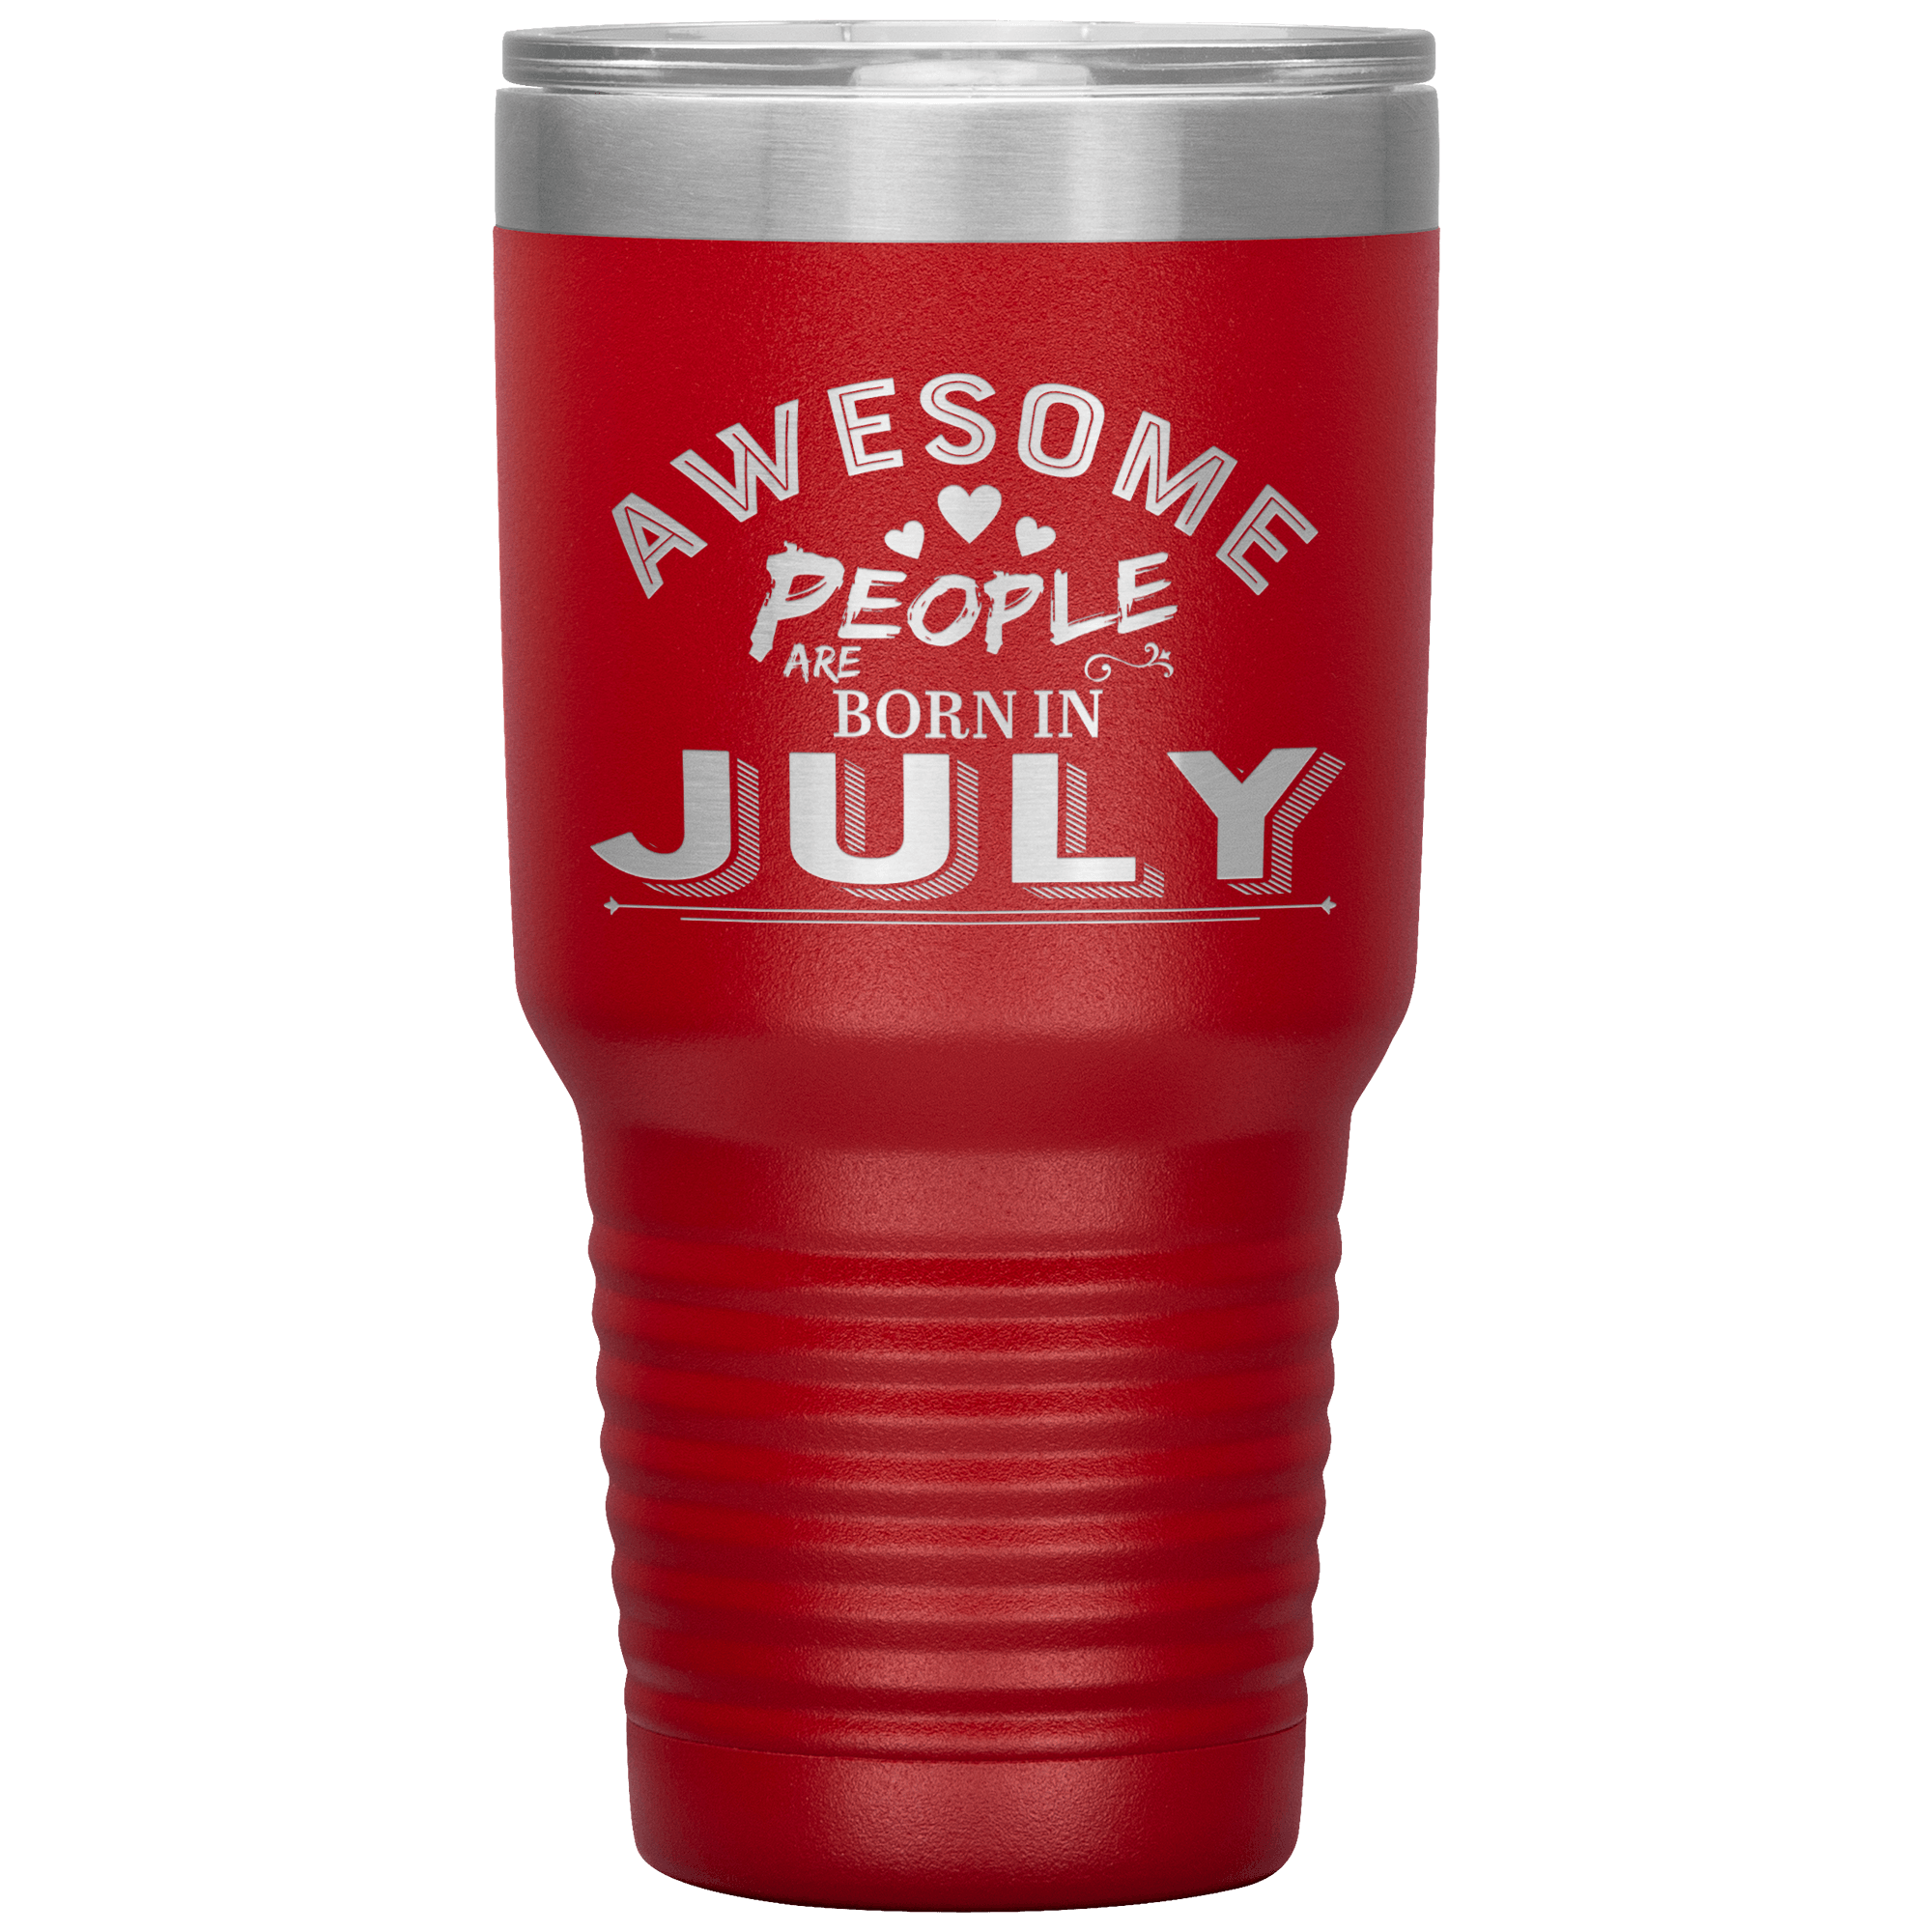 "AWESOME PEOPLE ARE BORN IN JULY" Tumbler